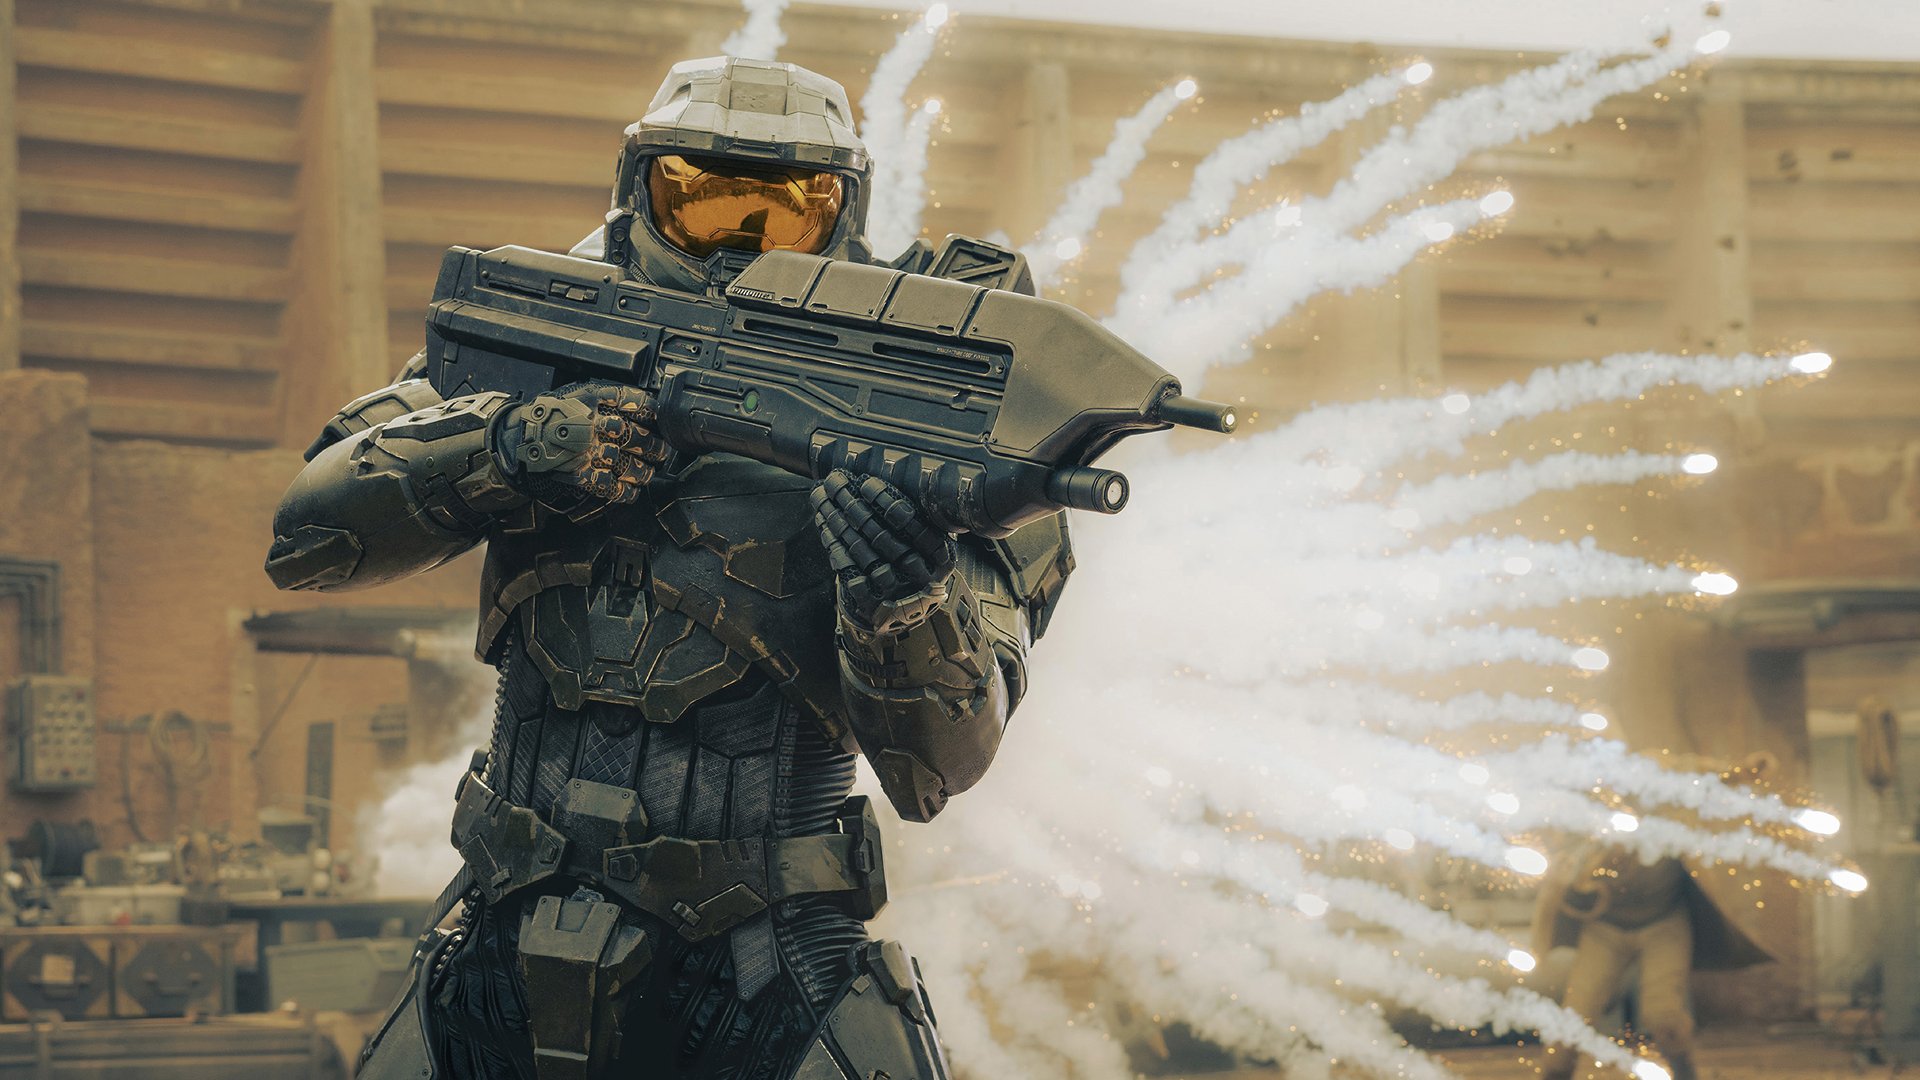 Master Chief fires his gun during a battle in the Paramount Plus television series Halo